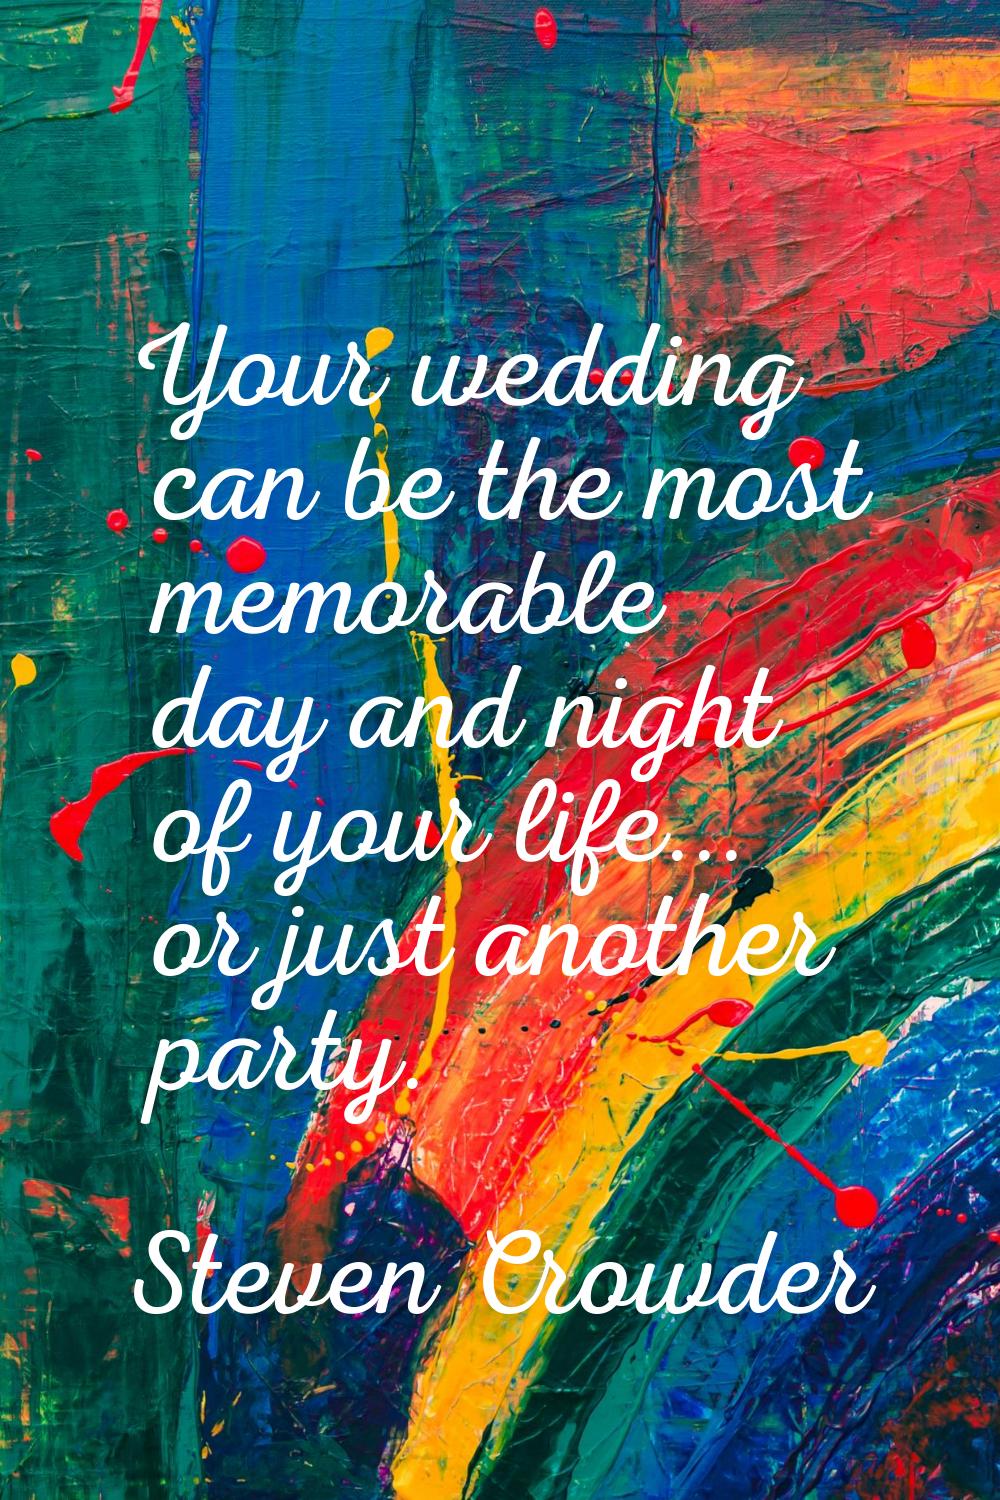 Your wedding can be the most memorable day and night of your life... or just another party.